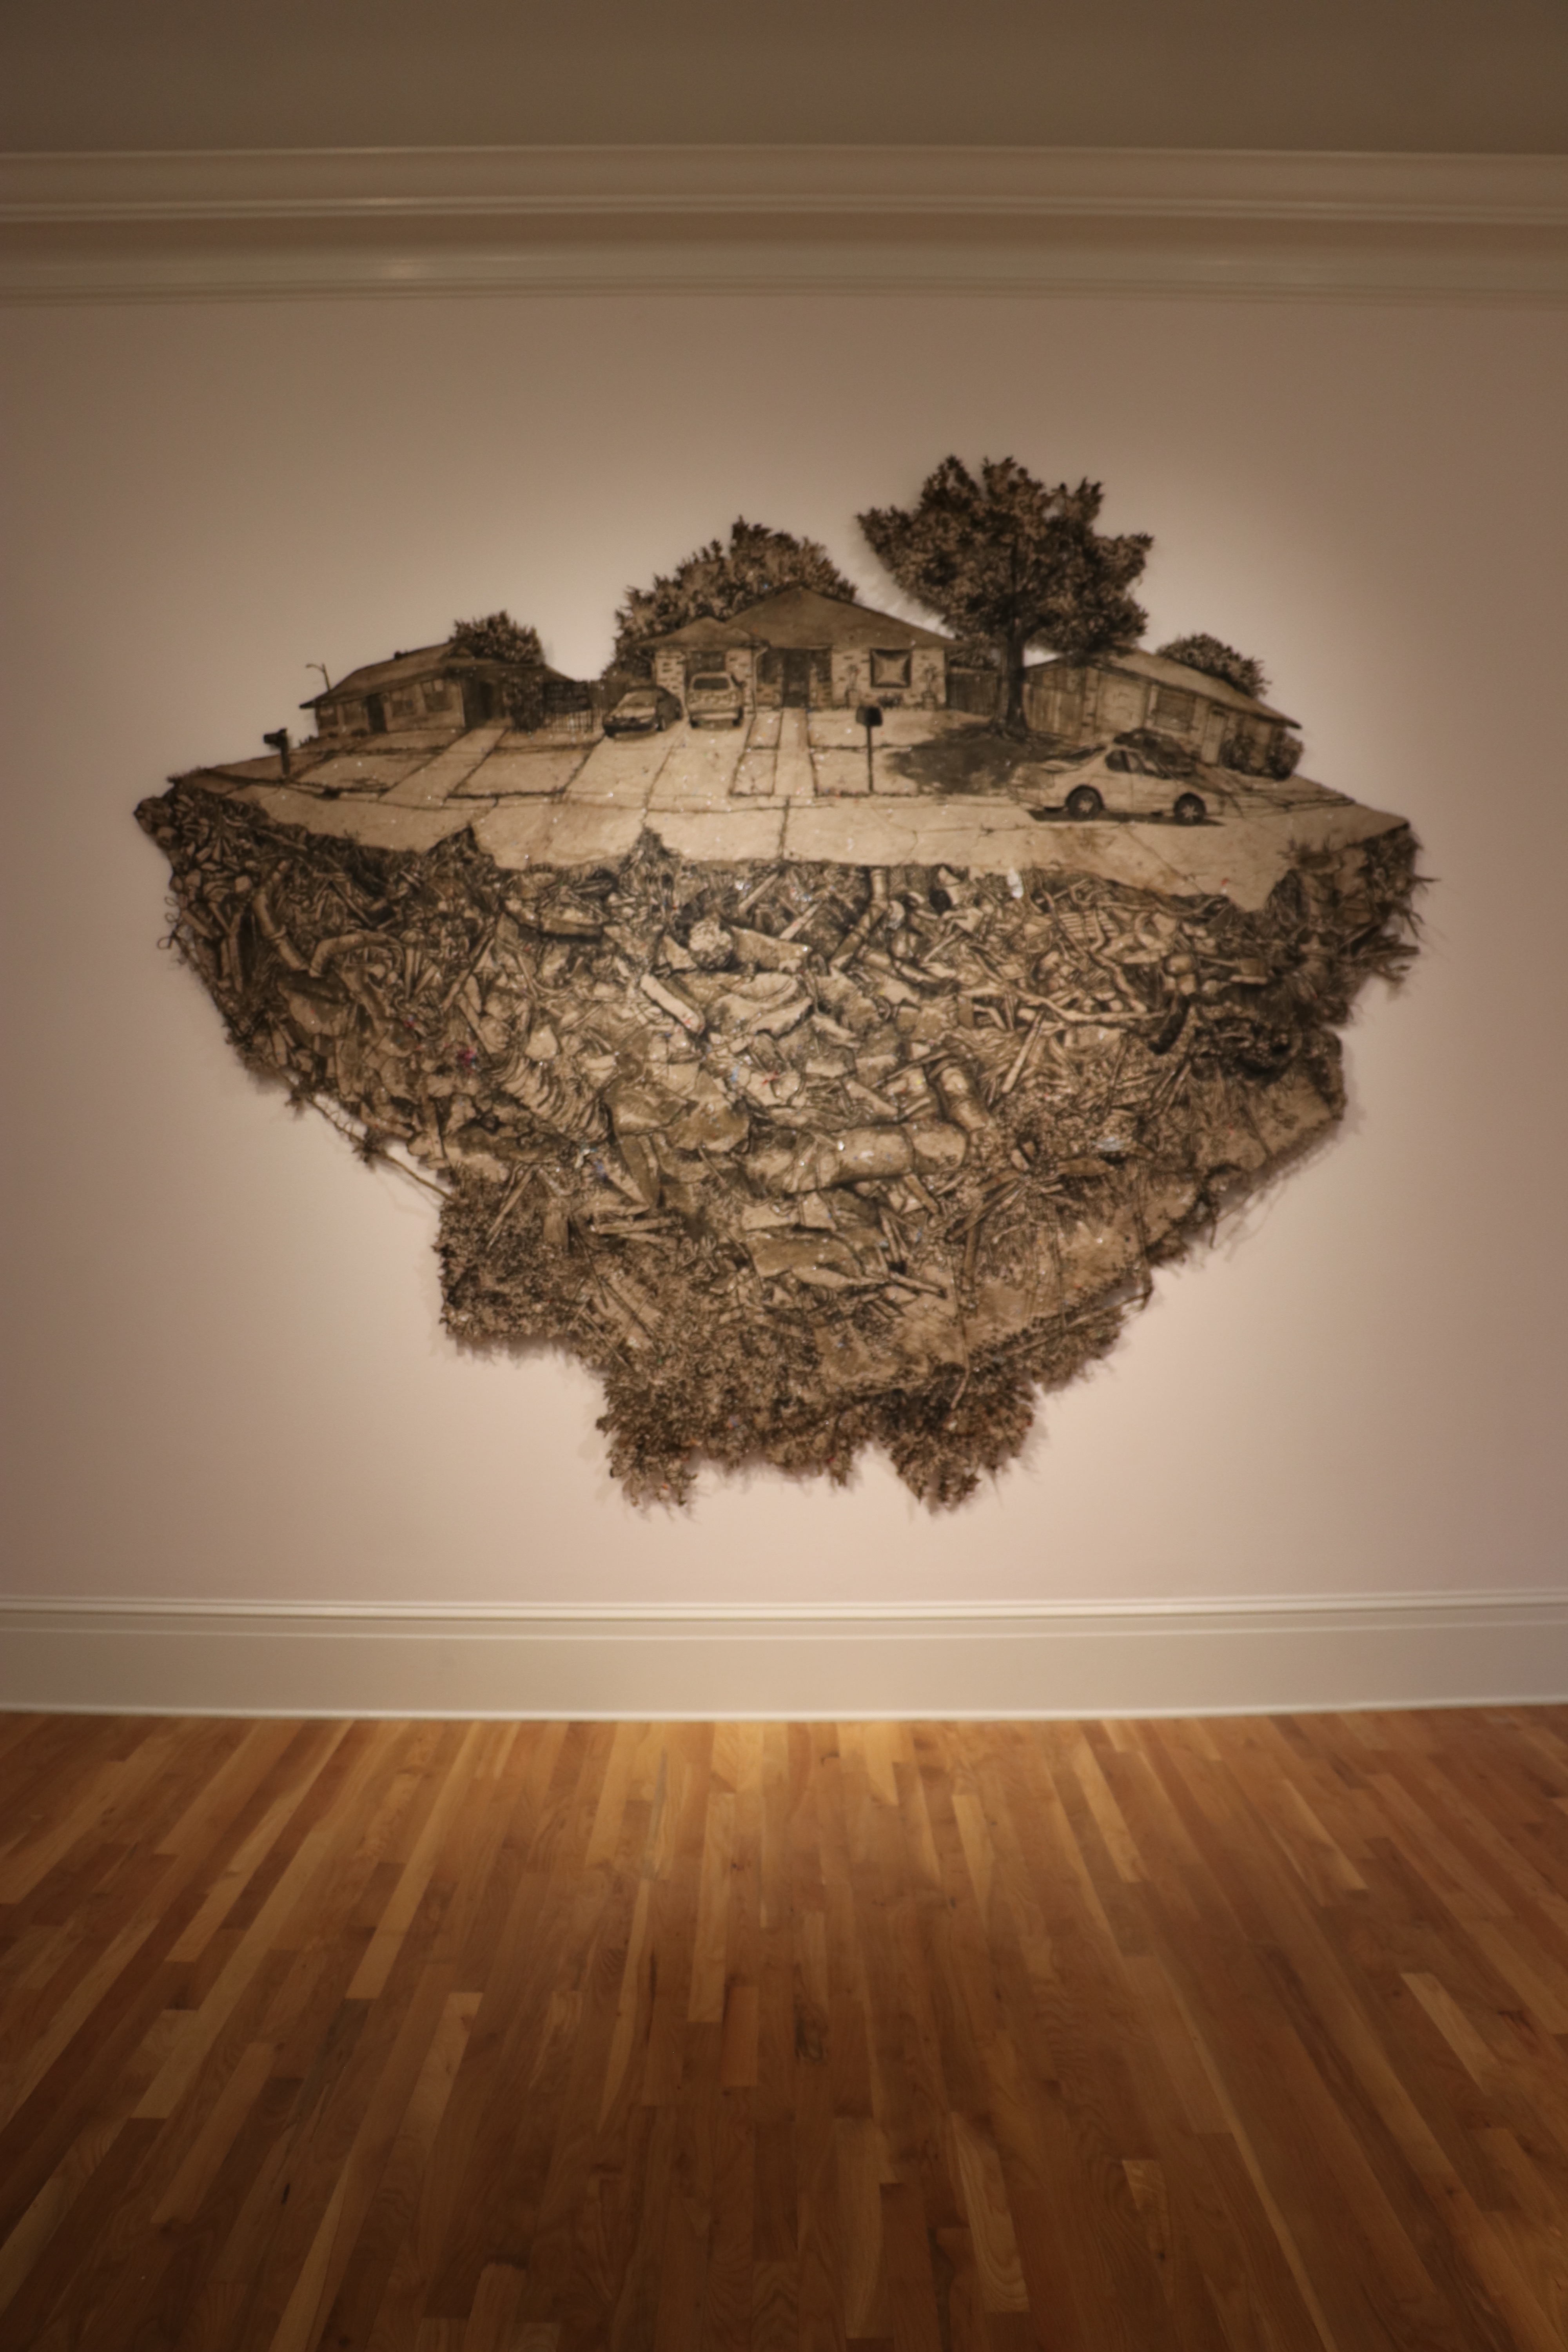 A handmade, irregularly sized piece of paper printed with images of a neighborhood atop a landfill hangs on a museum wall